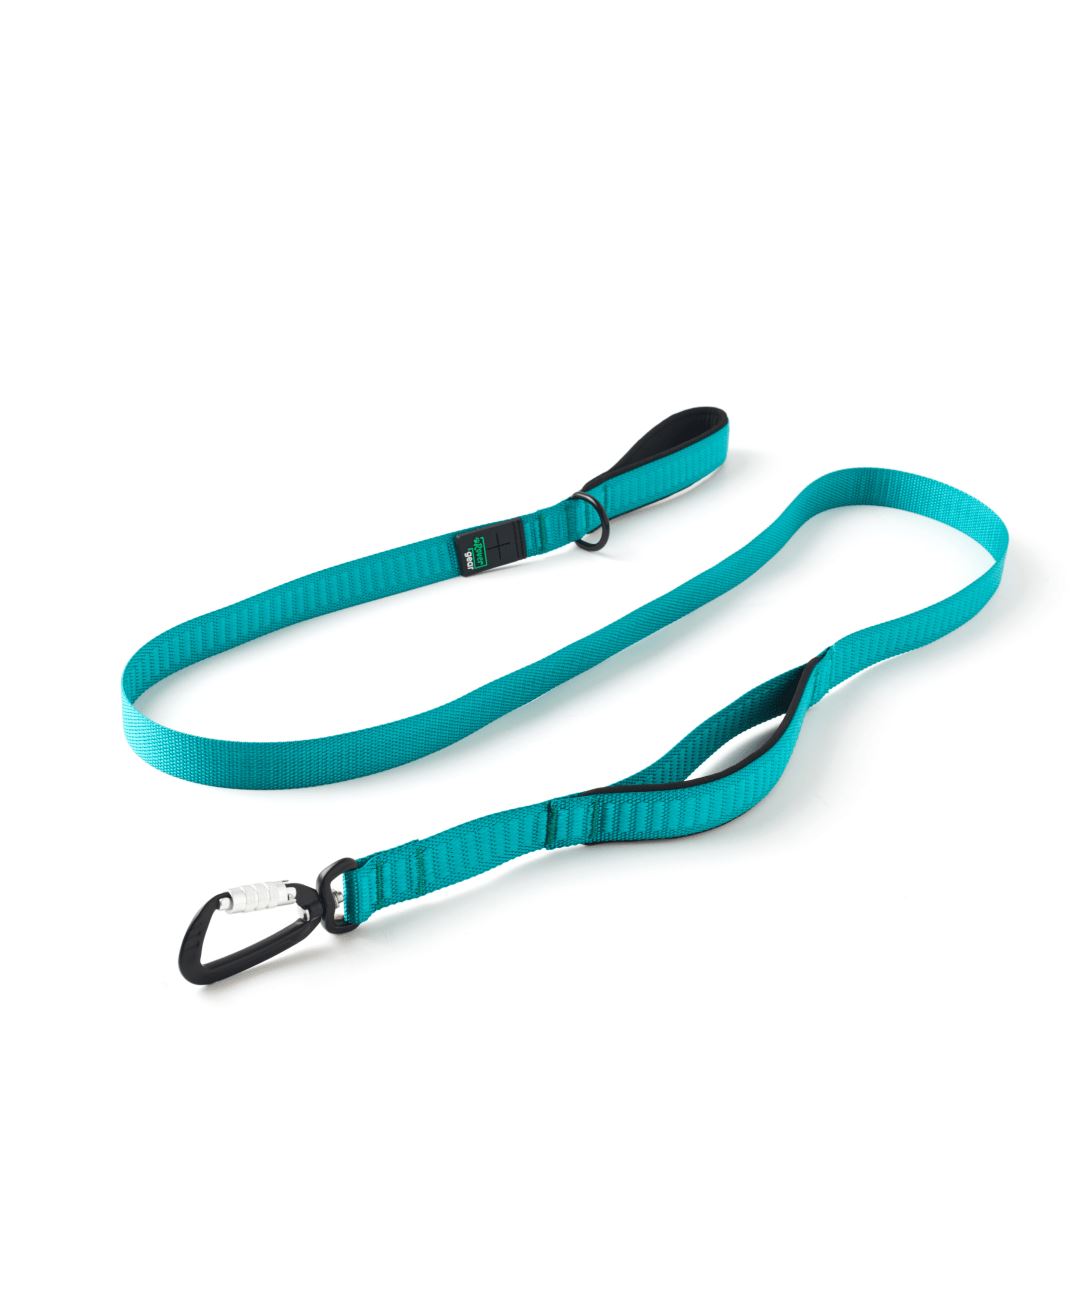 Rover Gear Essential Dog Walking Leash Leash Rover Store 6 ft Teal 